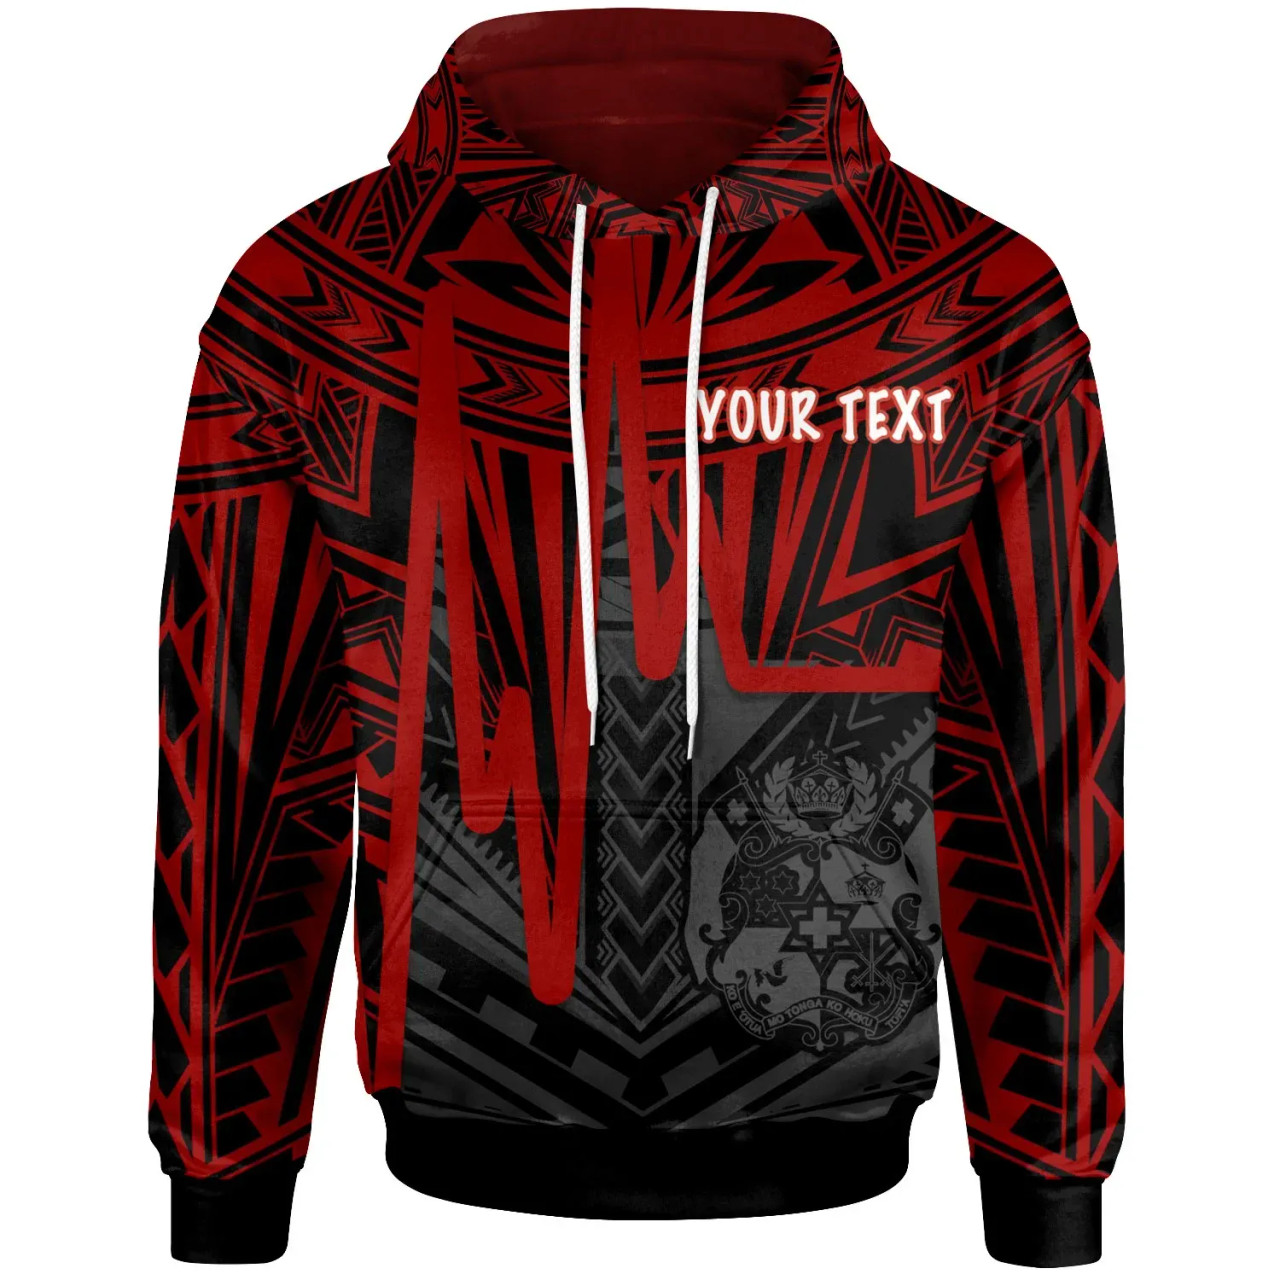 Tonga Personalised Hoodie - Tonga Seal In Heartbeat Patterns Style (Red)